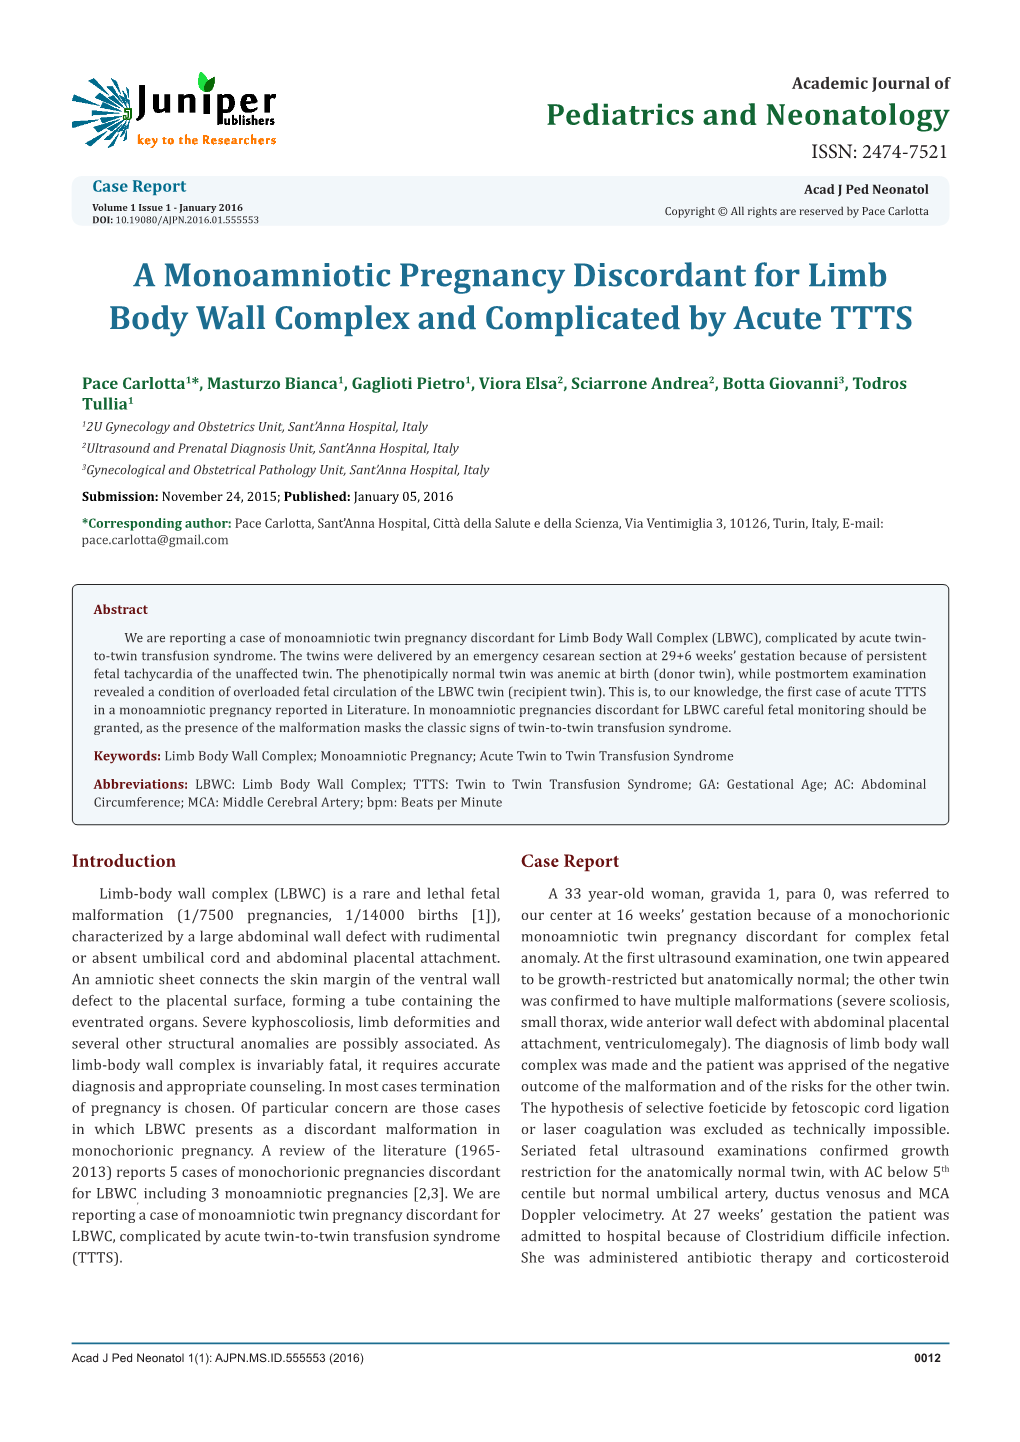 A Monoamniotic Pregnancy Discordant for Limb Body Wall Complex and Complicated by Acute TTTS